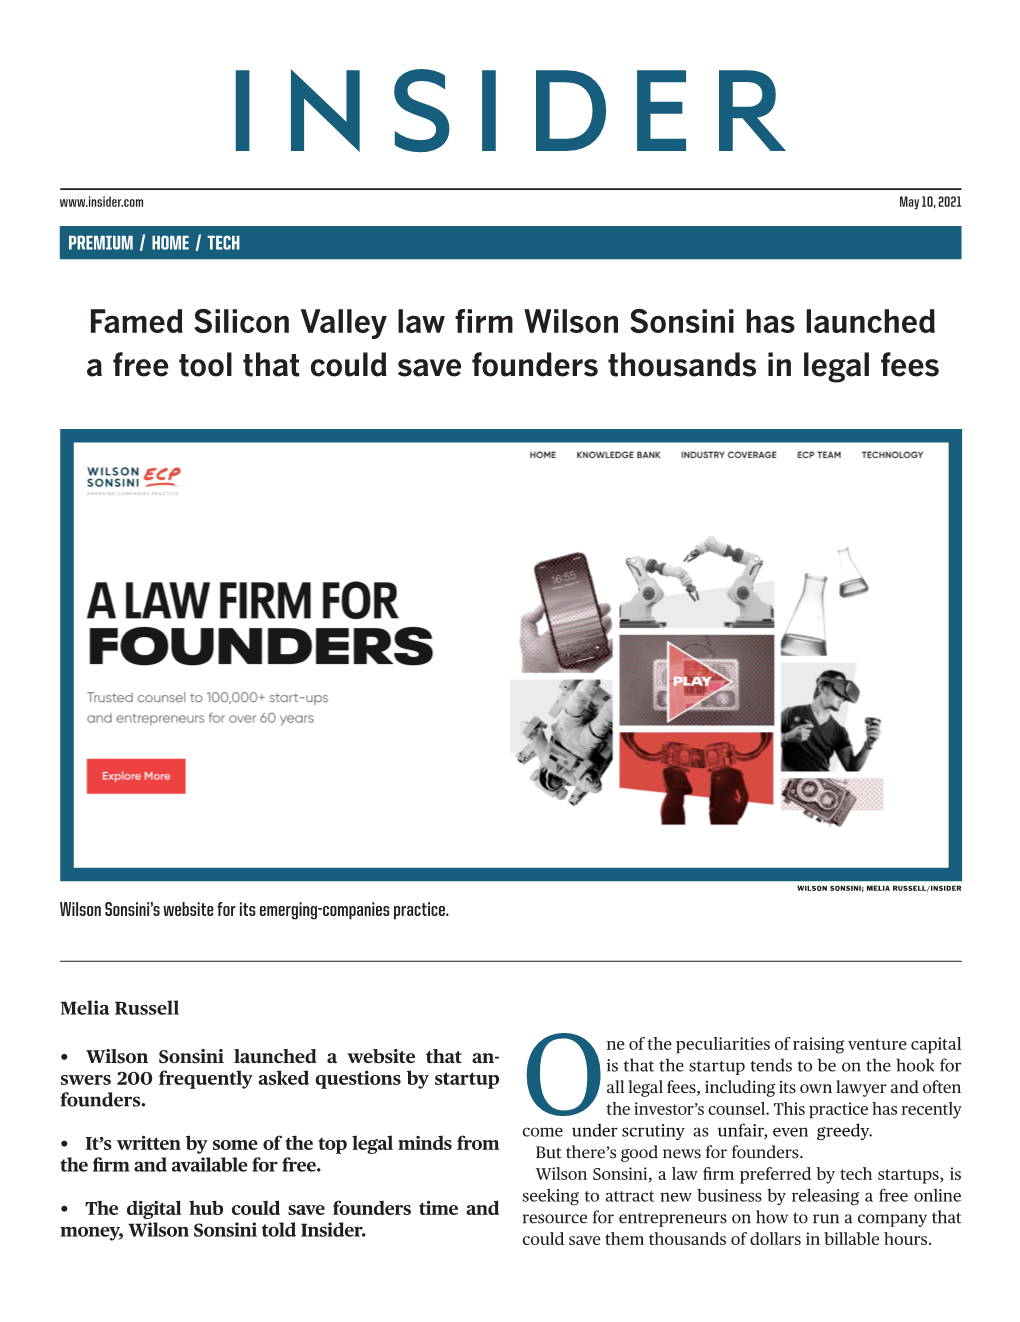 Famed Silicon Valley Law Firm Wilson Sonsini Has Launched a Free Tool That Could Save Founders Thousands in Legal Fees